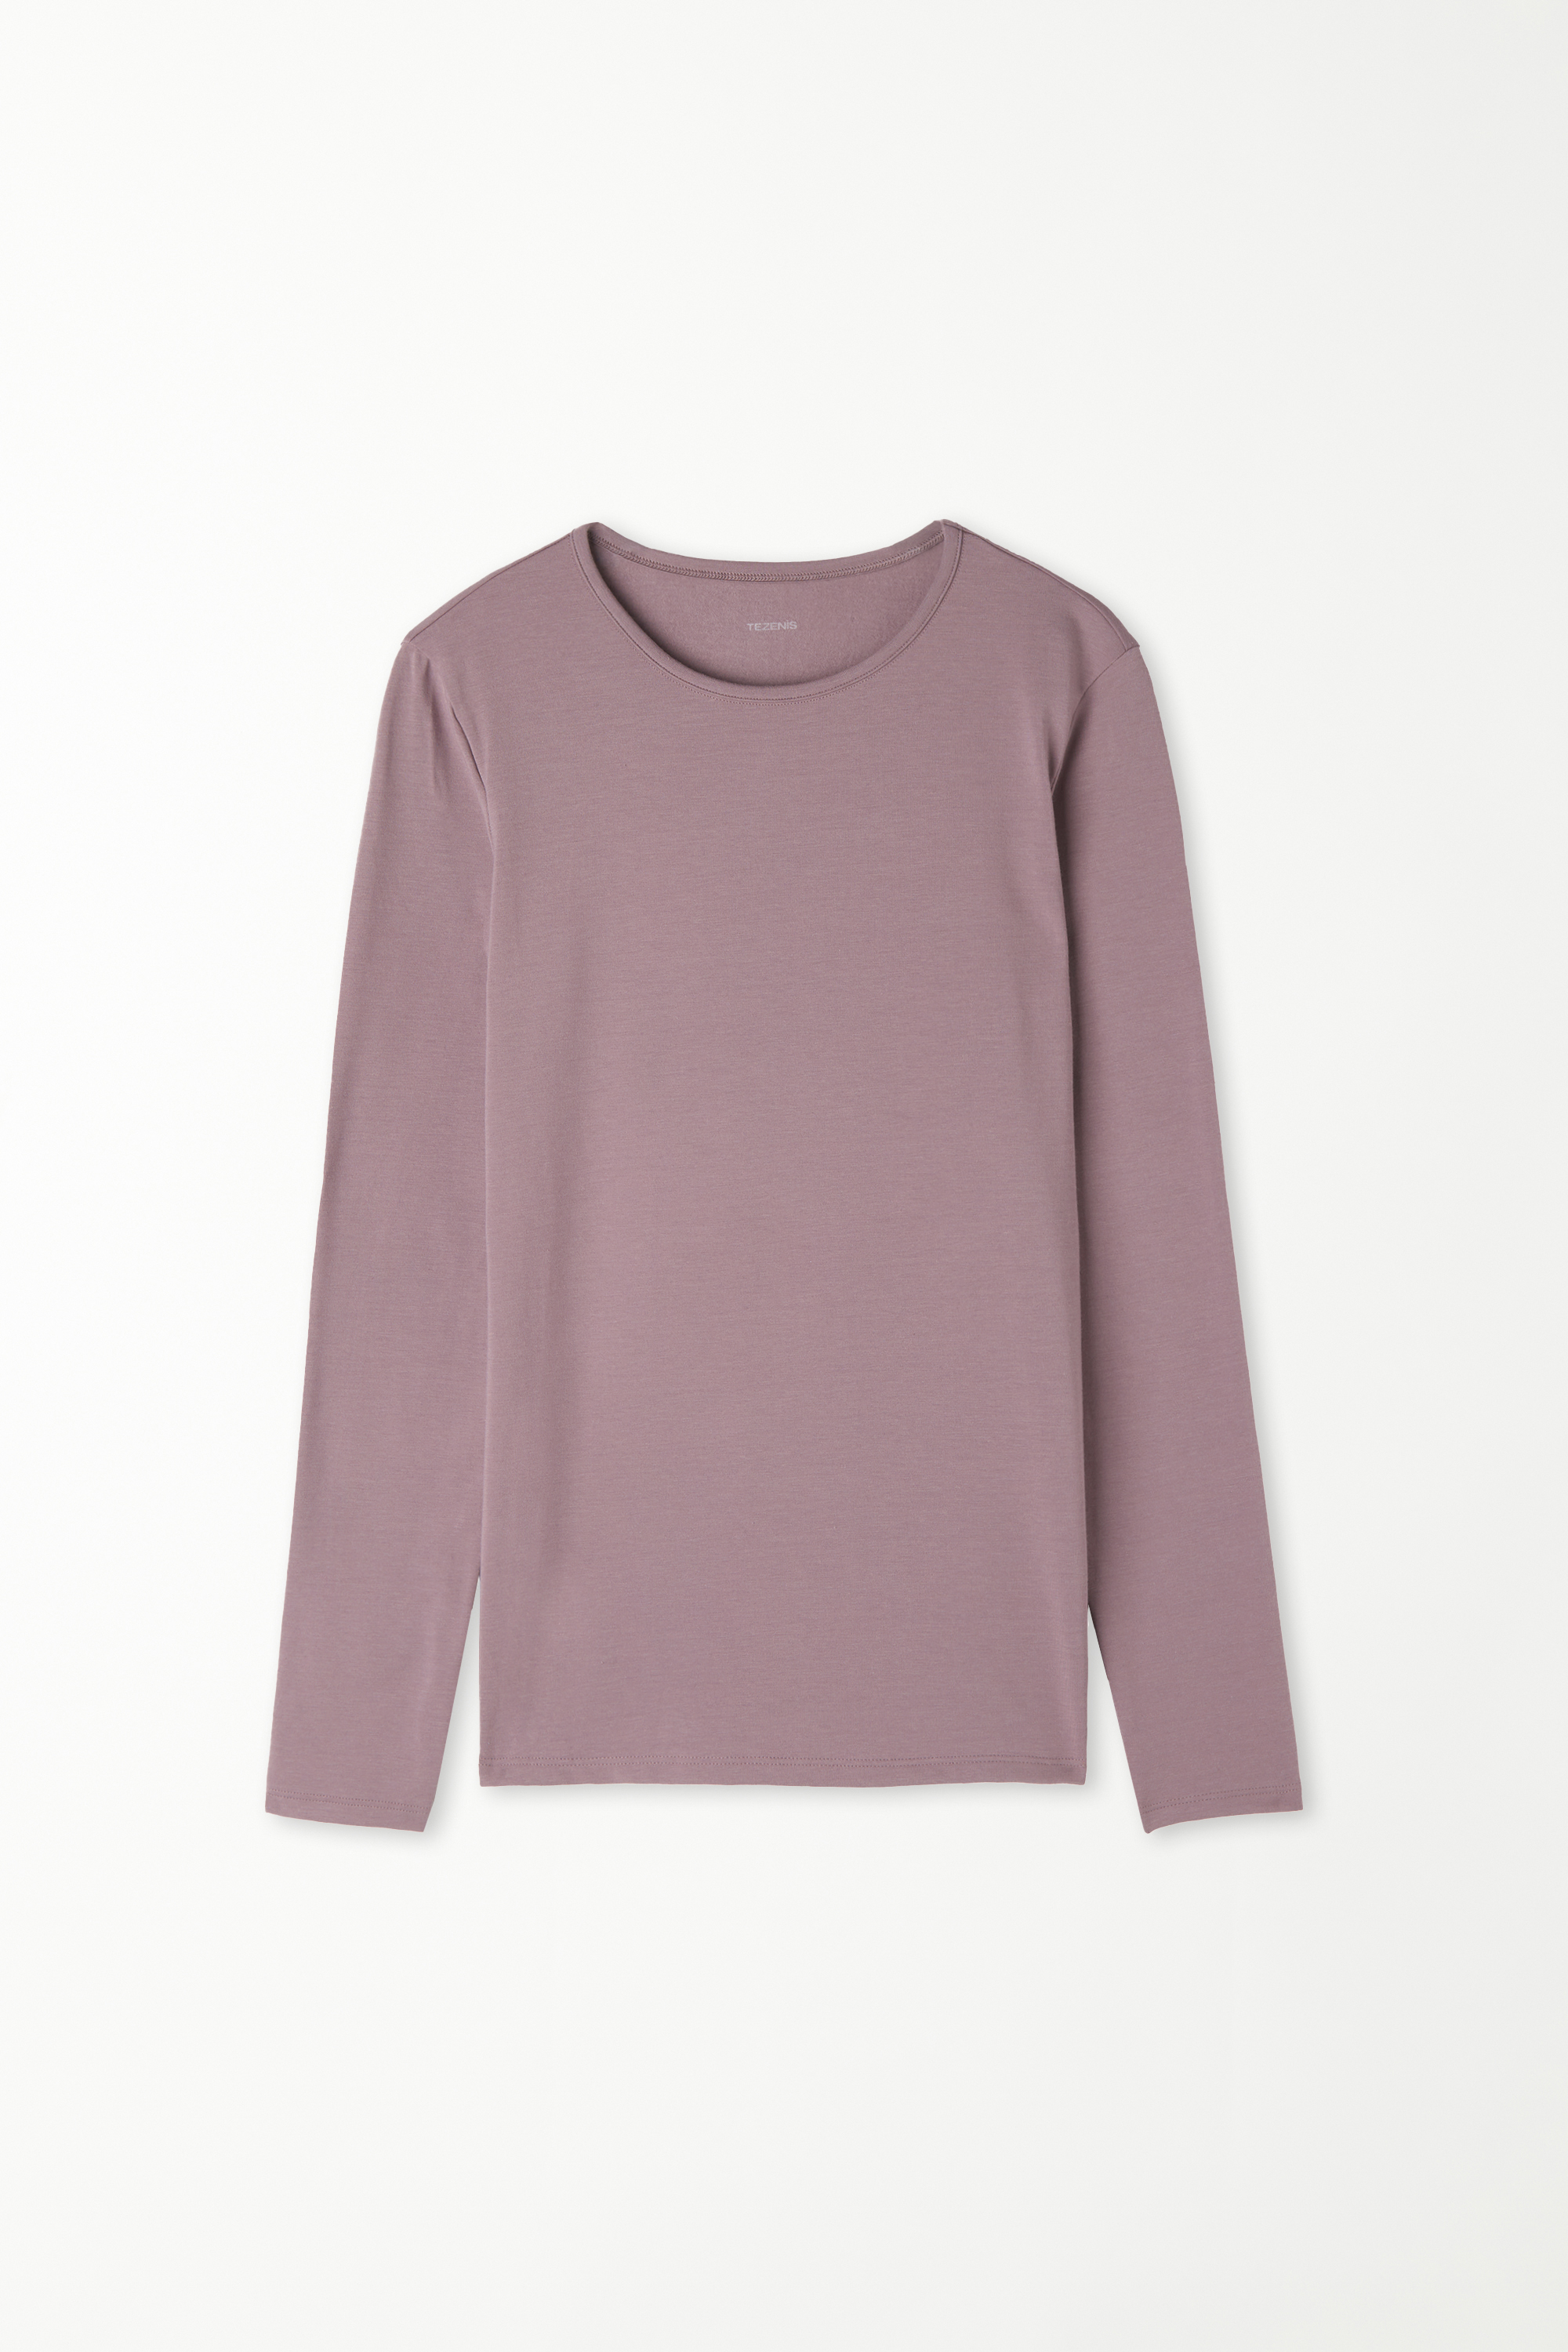 Thermal Modal and Cotton Crew-Neck Top